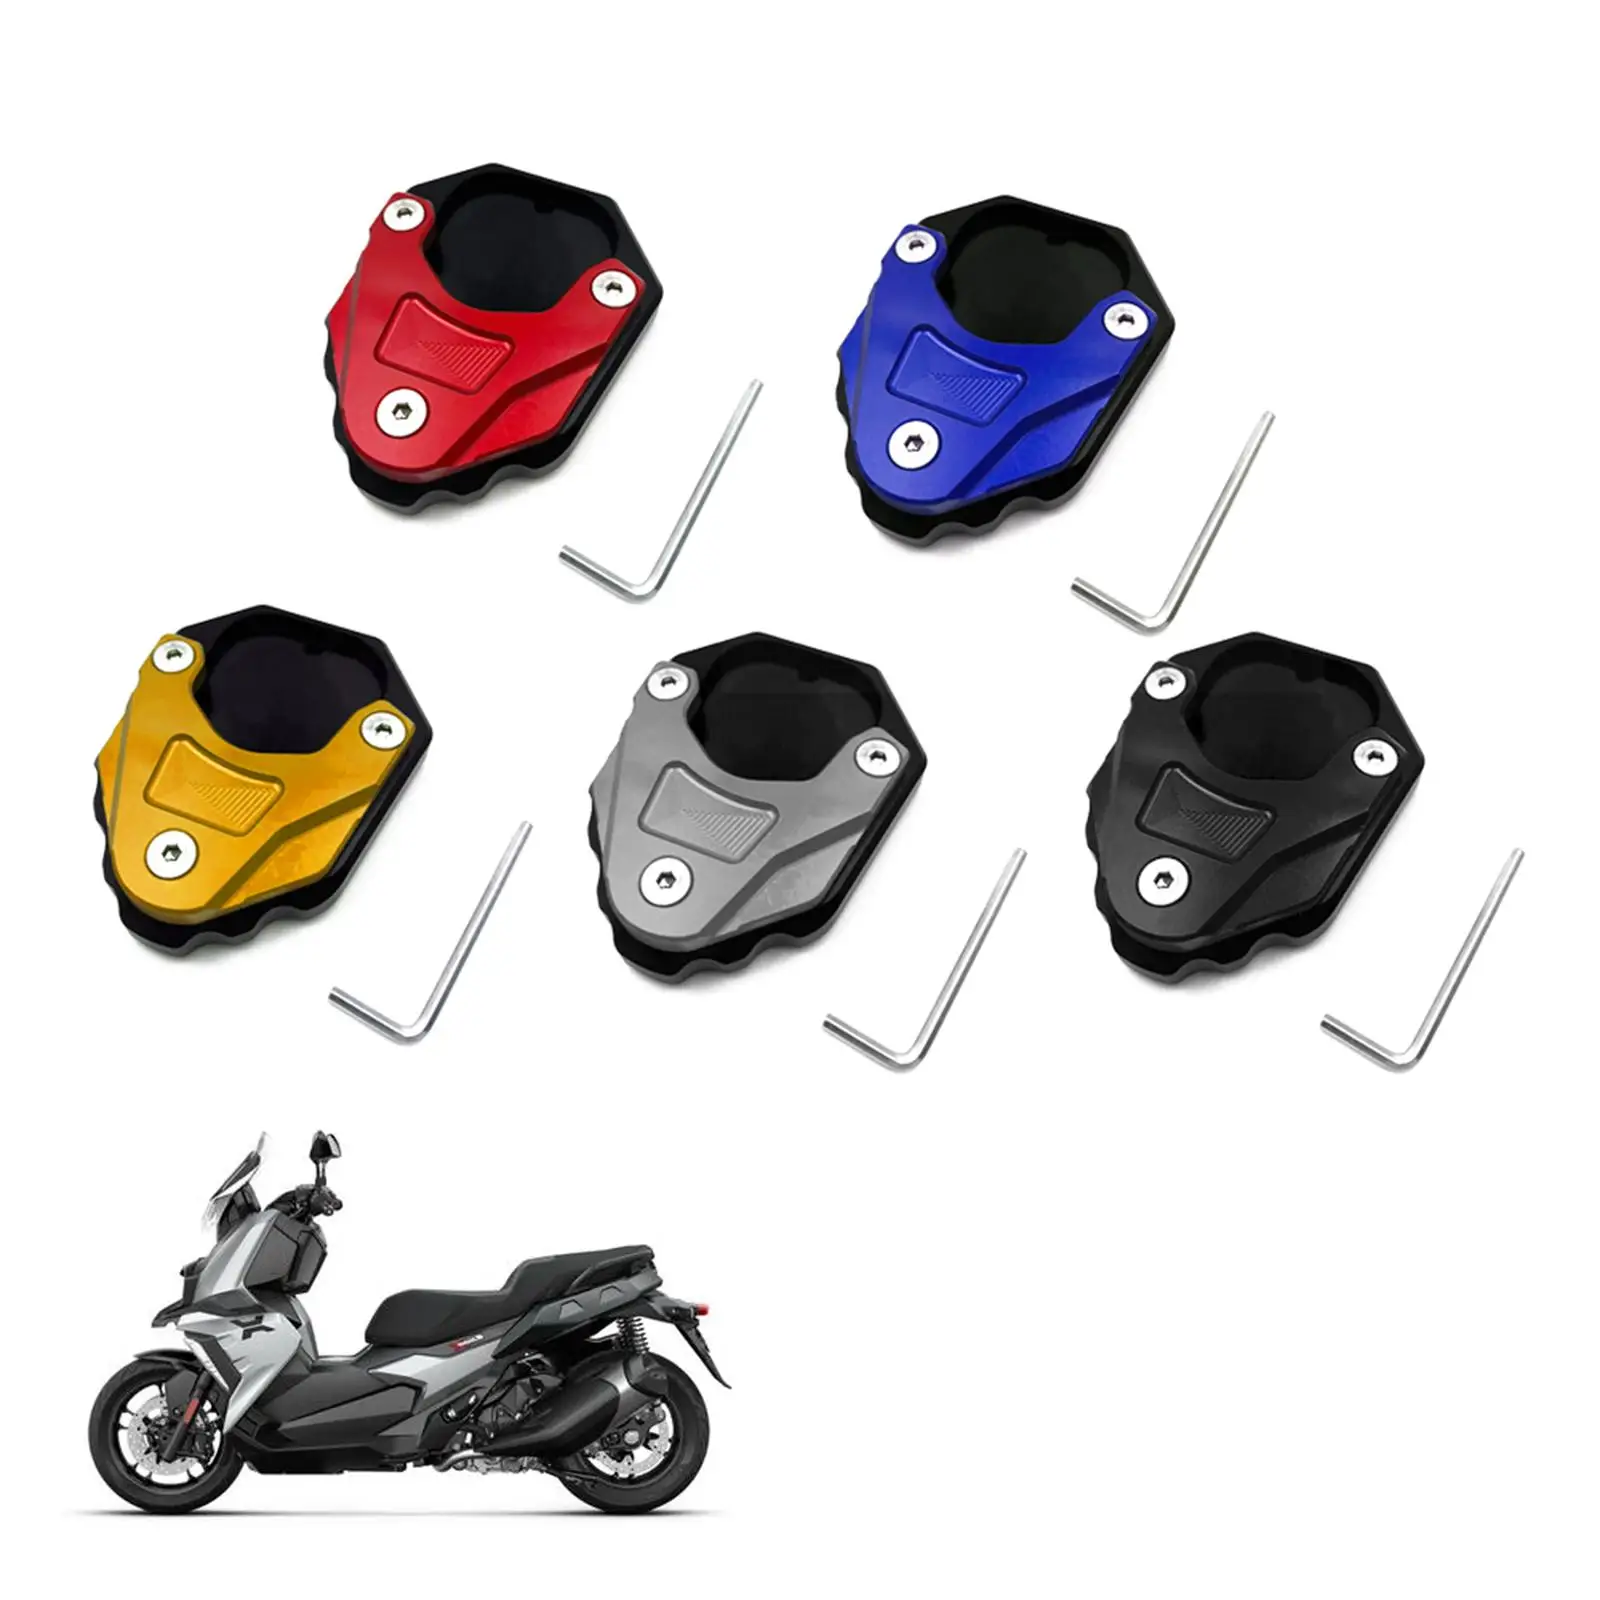 Motorcycle Side Stand Foot Pad Accessory for C400GT C400x C400 19-21